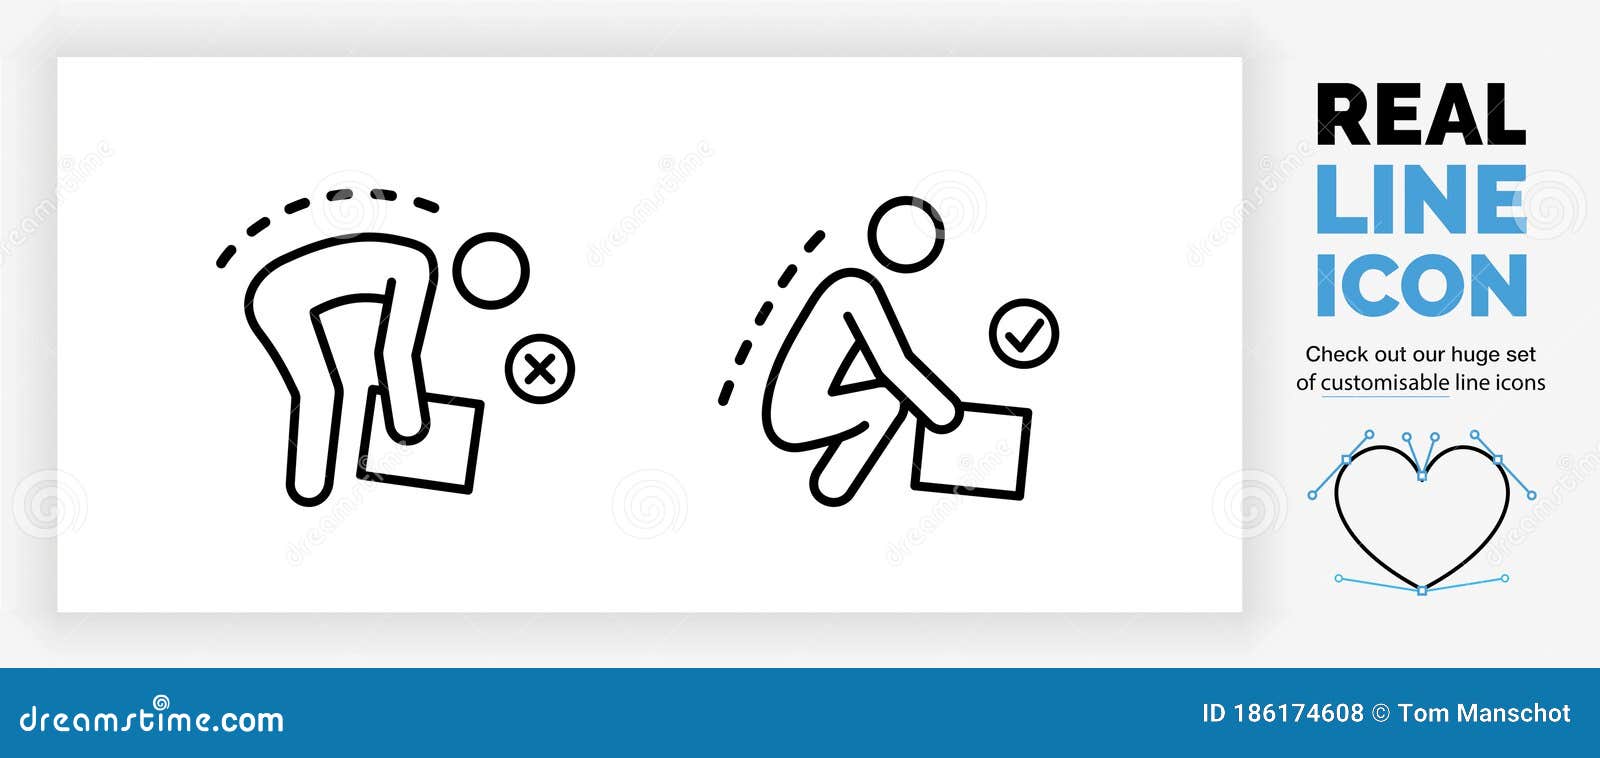 editable real line icon of a stick figure person doing heavy lifting with a correct and incorrect posture